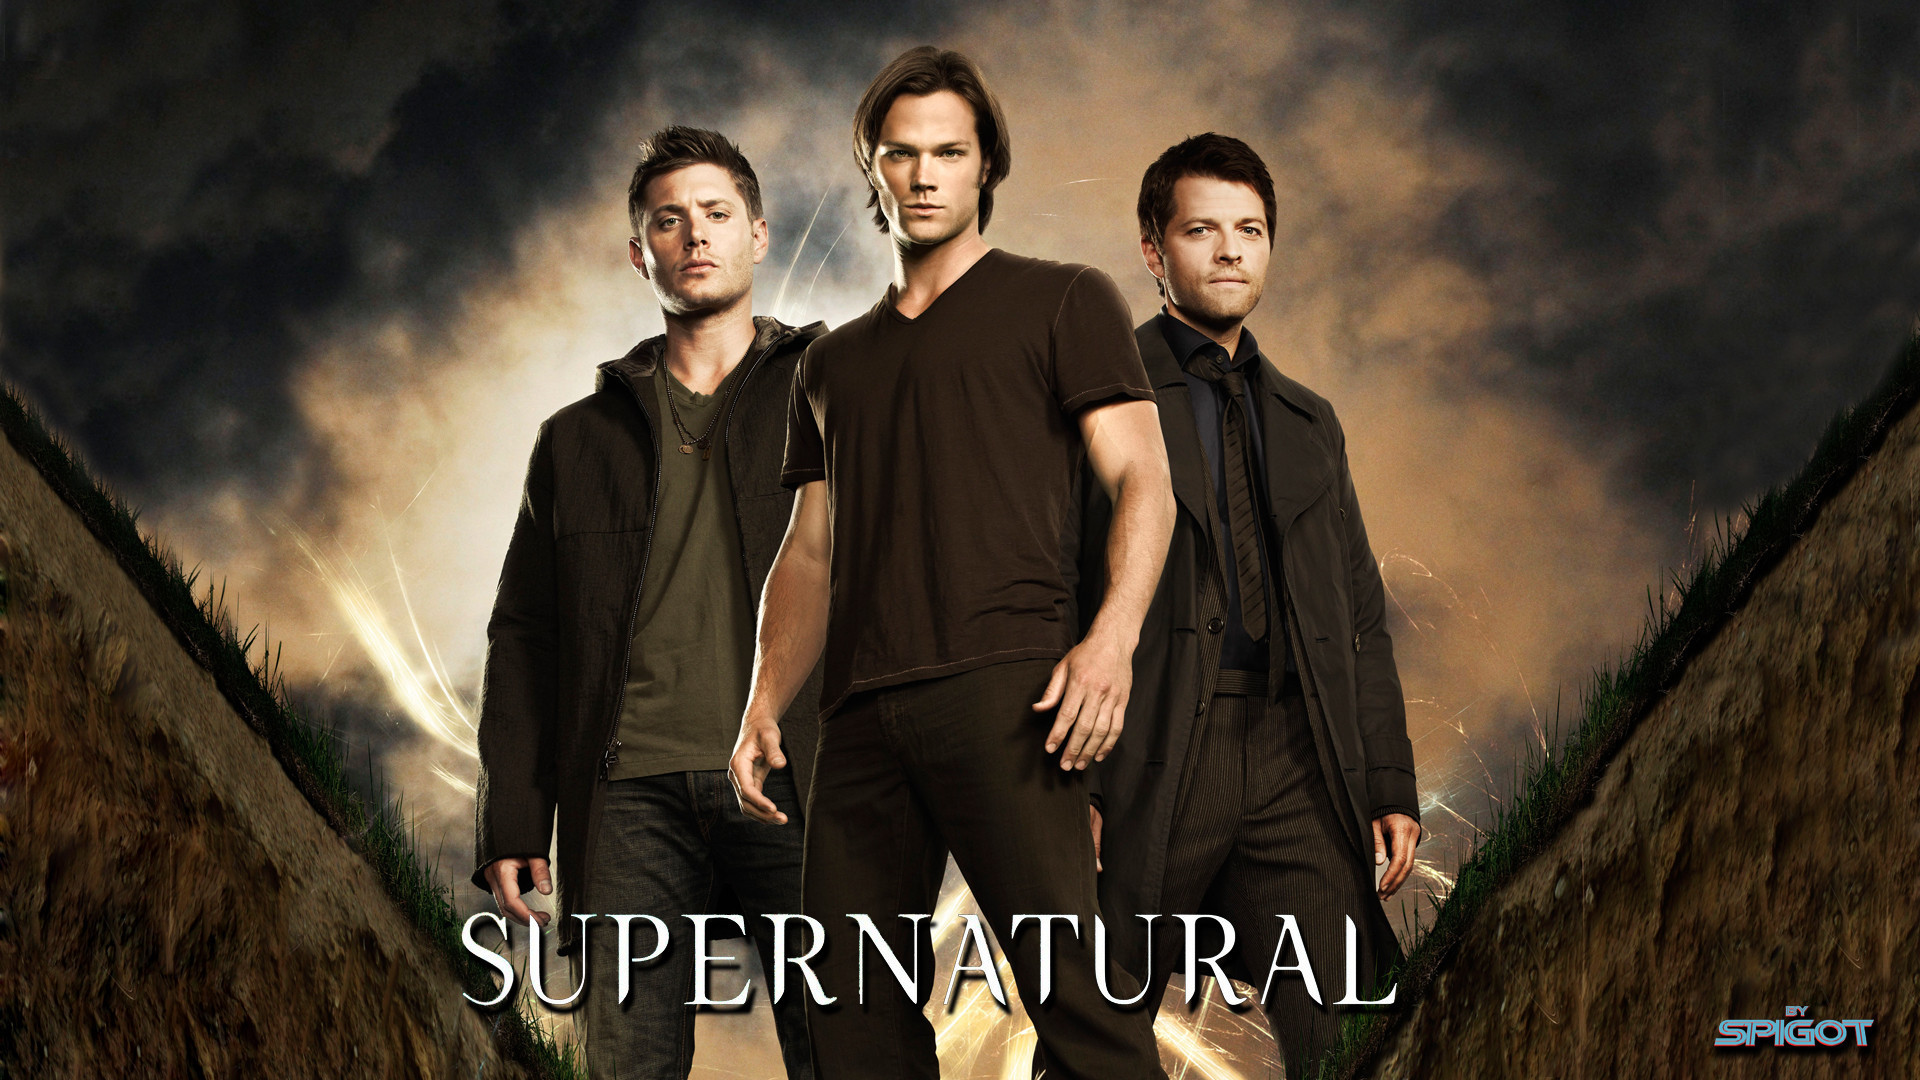 Jared Padalecki and Jensen Ackles star as the main duo of the show, the Winchester Brothers, Sam and Dean, other characters and new additions from the later